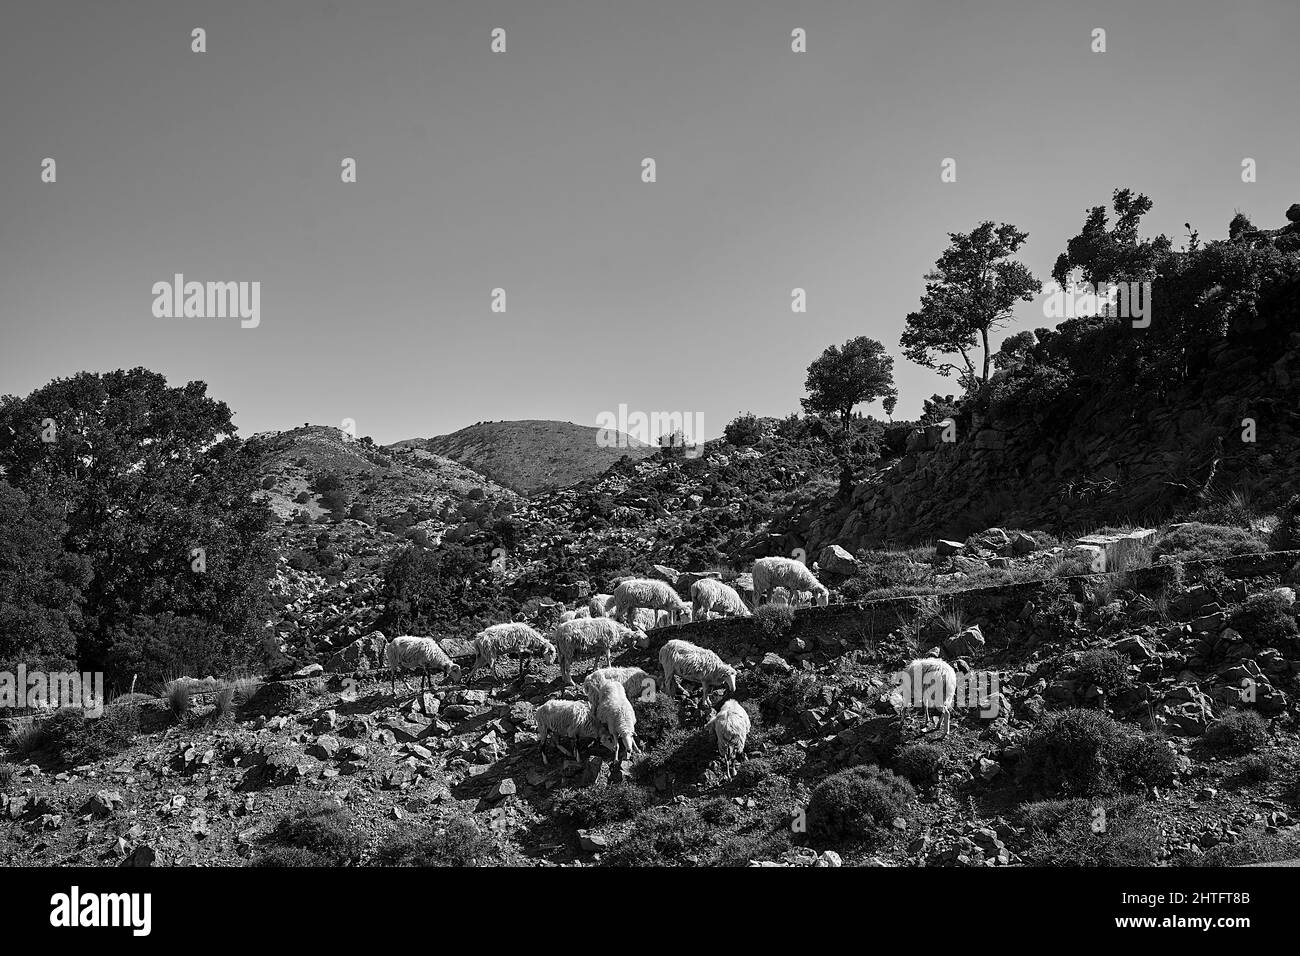 A herd of sheep grazing in a mountain meadow in the Lefka Ori mountains on the island of Crete, Greece, monochrome Stock Photo